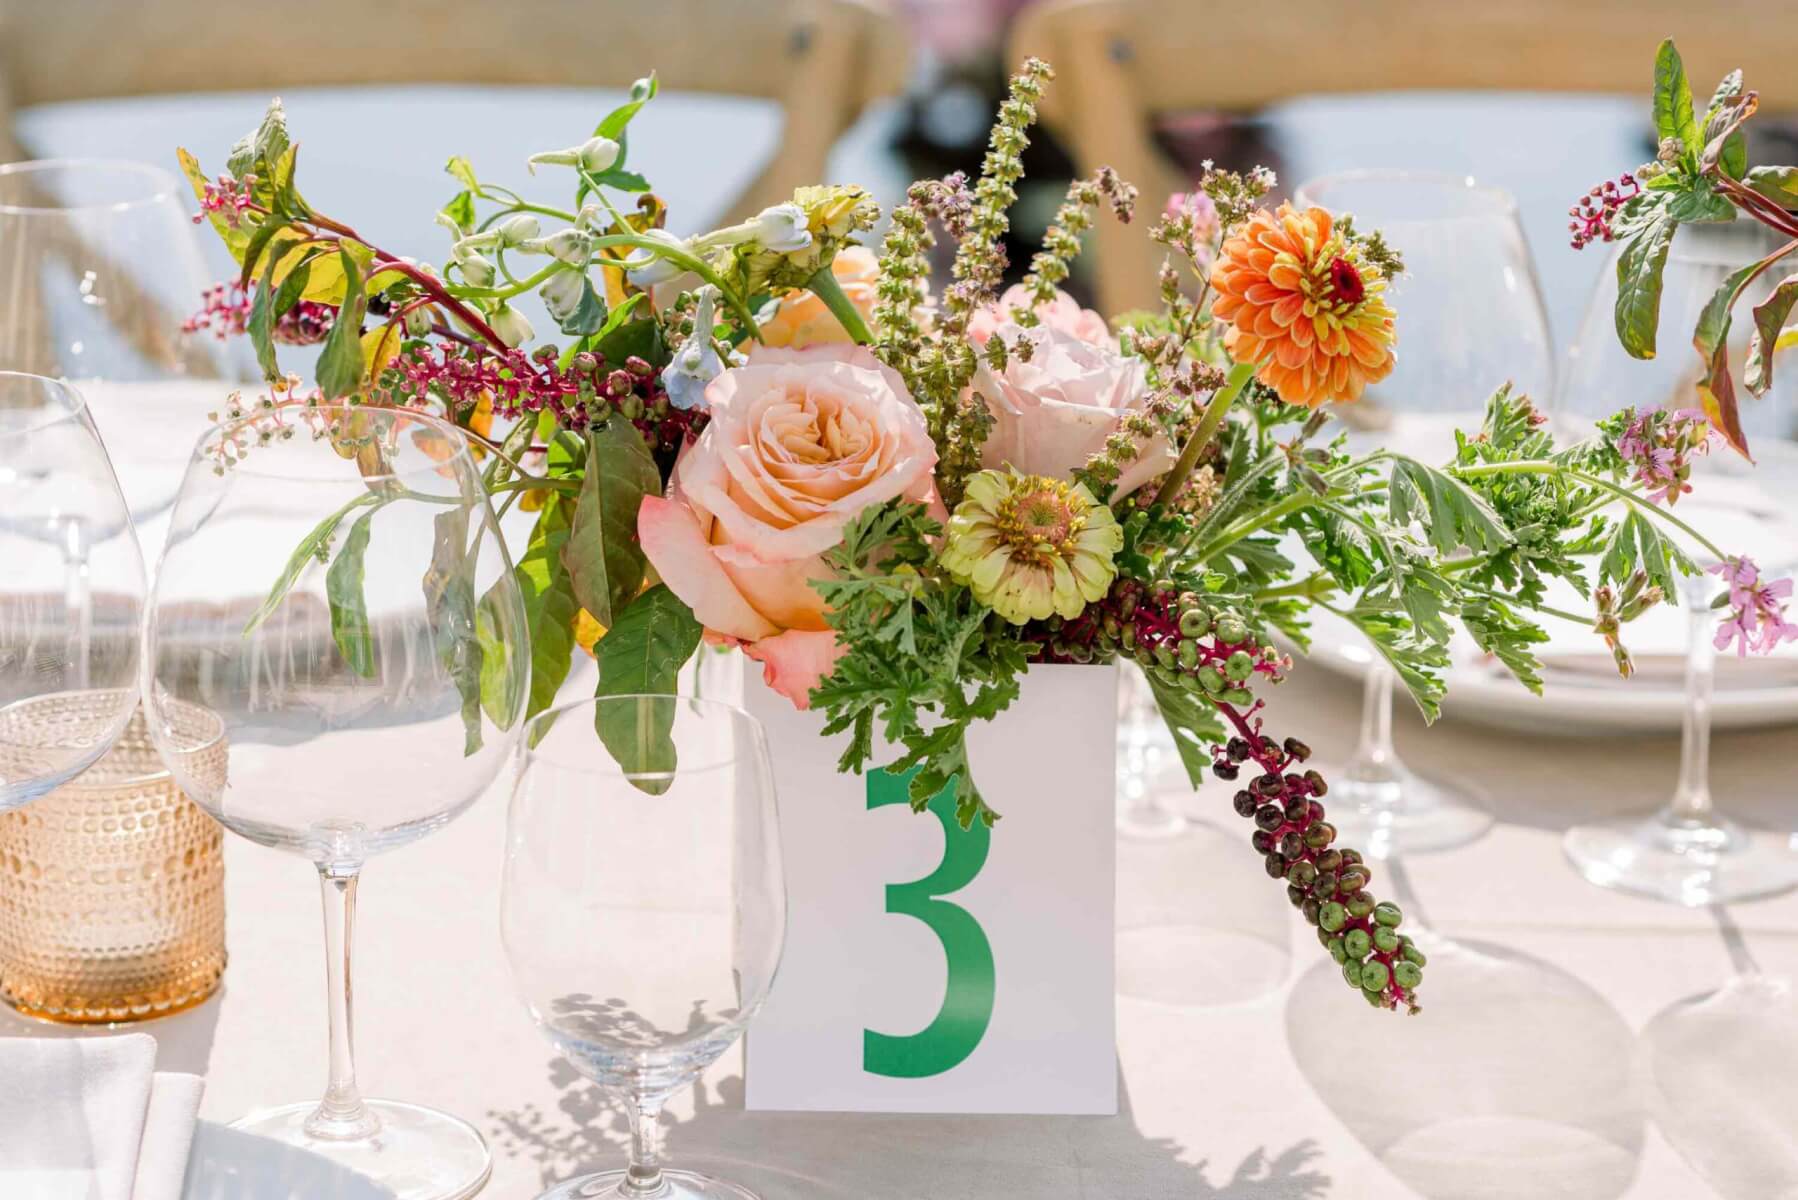 Bright wedding table flowers in playful colors, outdoors on a sunny day.